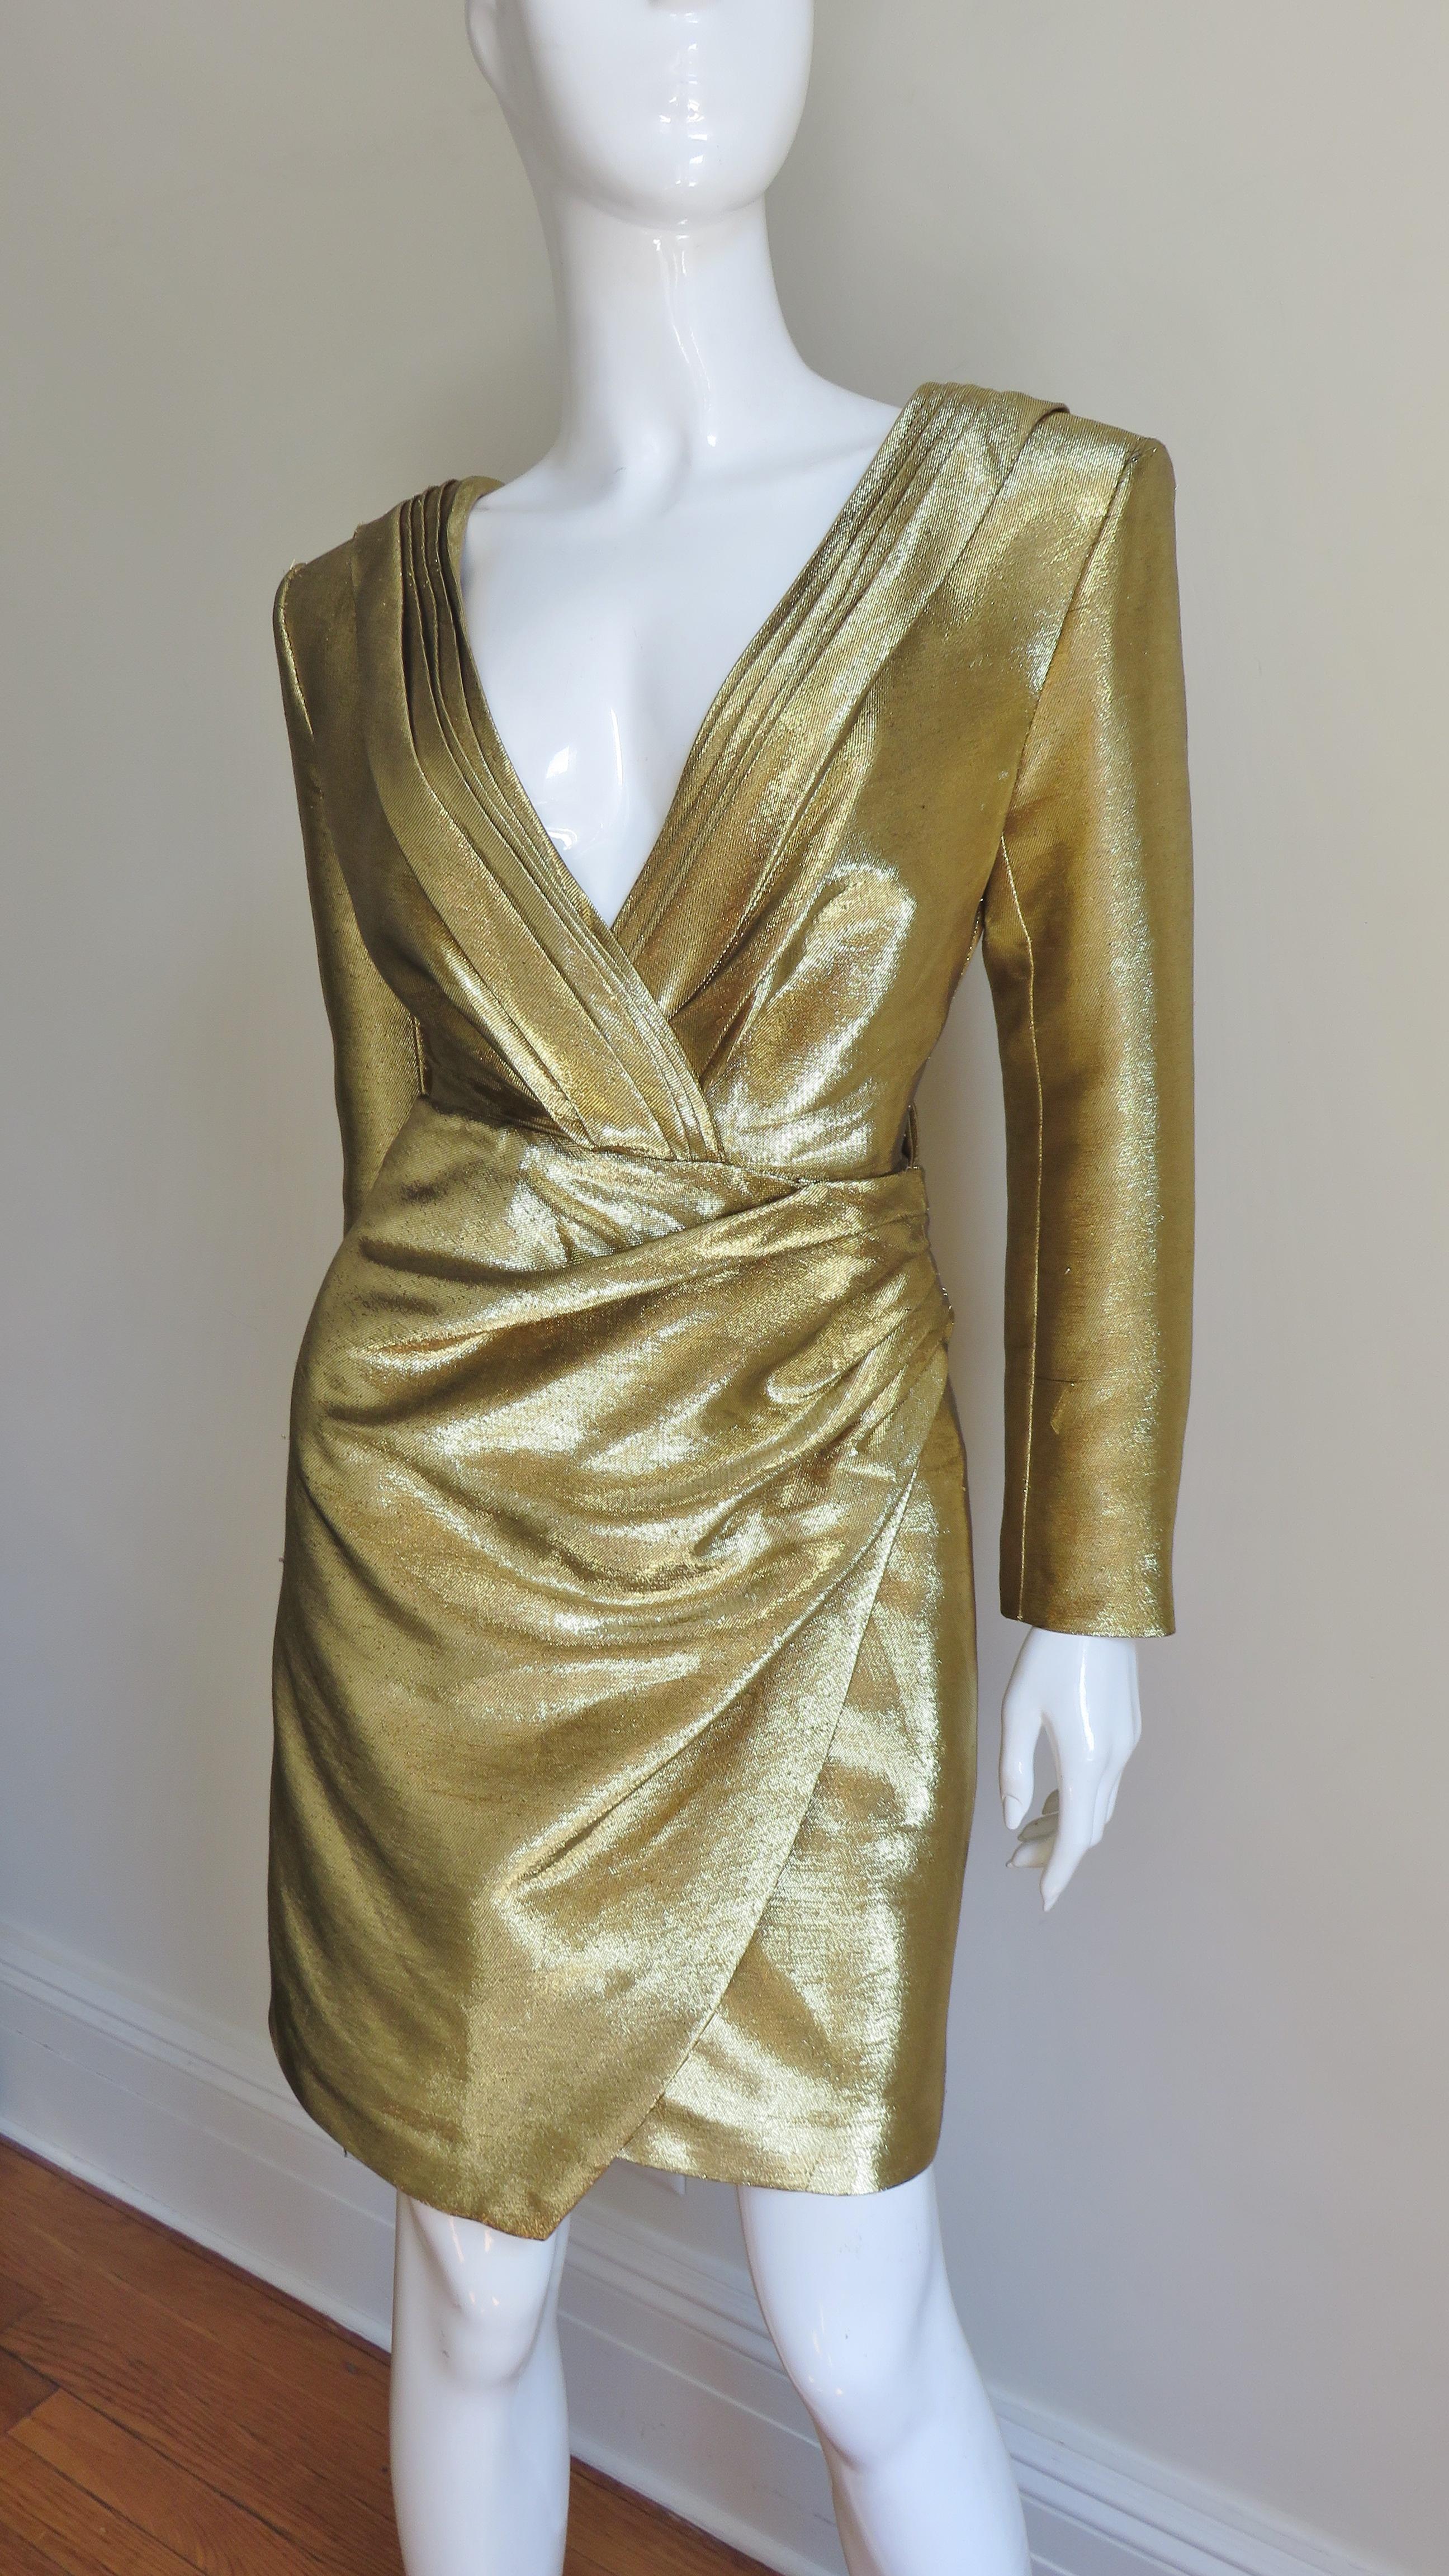 An incredible gold lame dress from Saint Laurent worn on runways and magazine covers. It has a wrapping V front and back neckline and a draping front panel skirt. There are small shoulder pads, 5 self covered buttons on each cuff and a matching gold